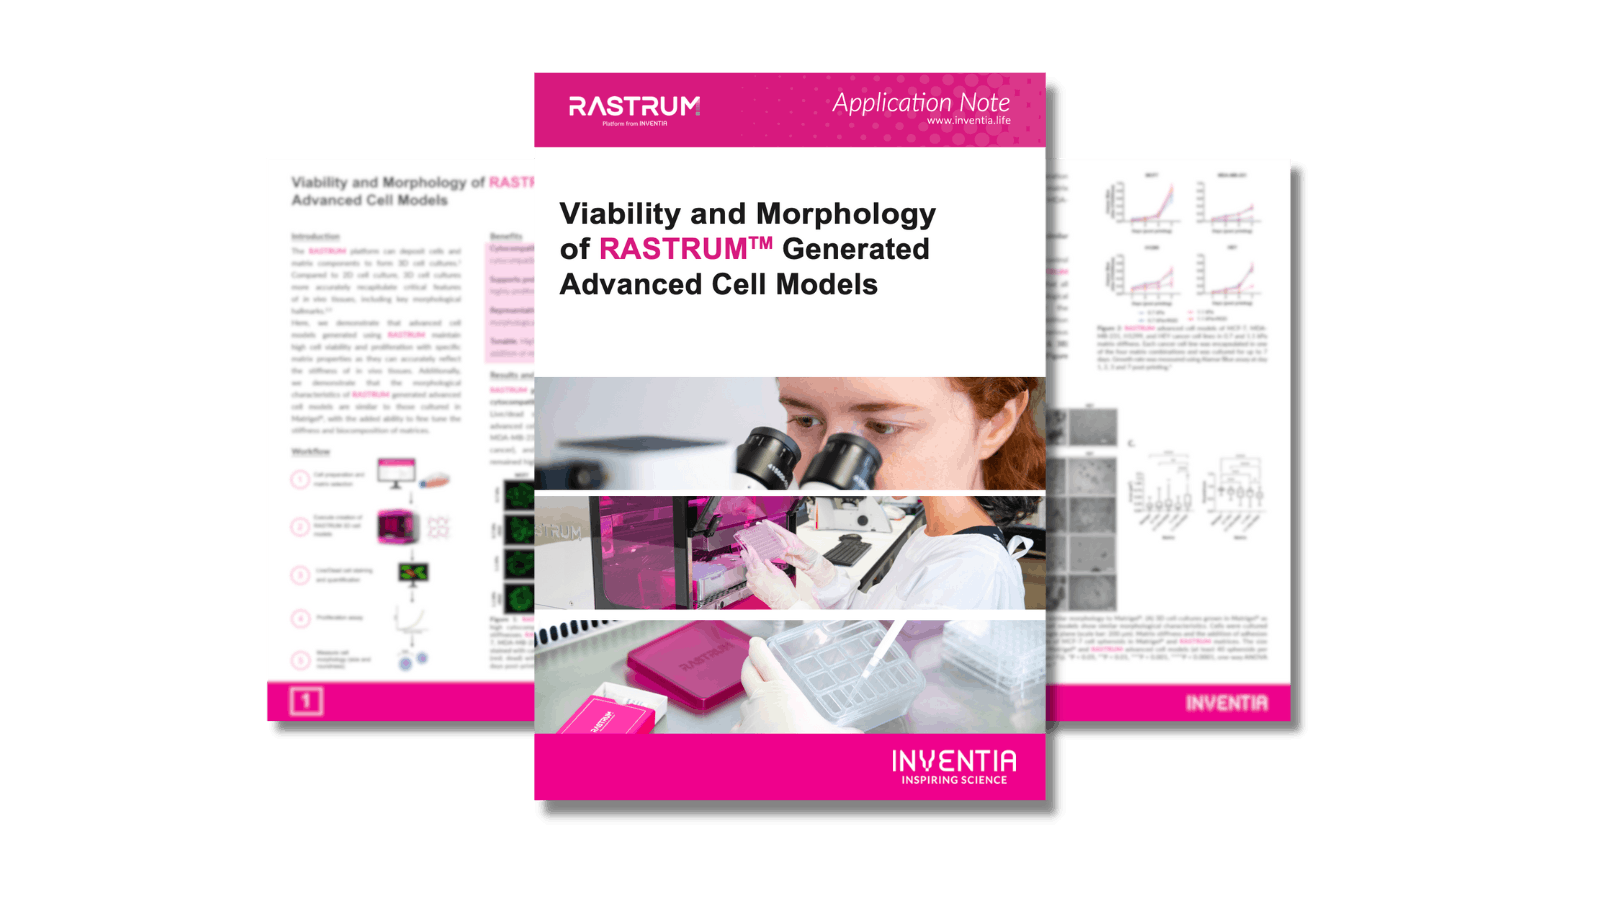 Viability and Morphology of RASTRUM™ Generated Advanced Cell Models